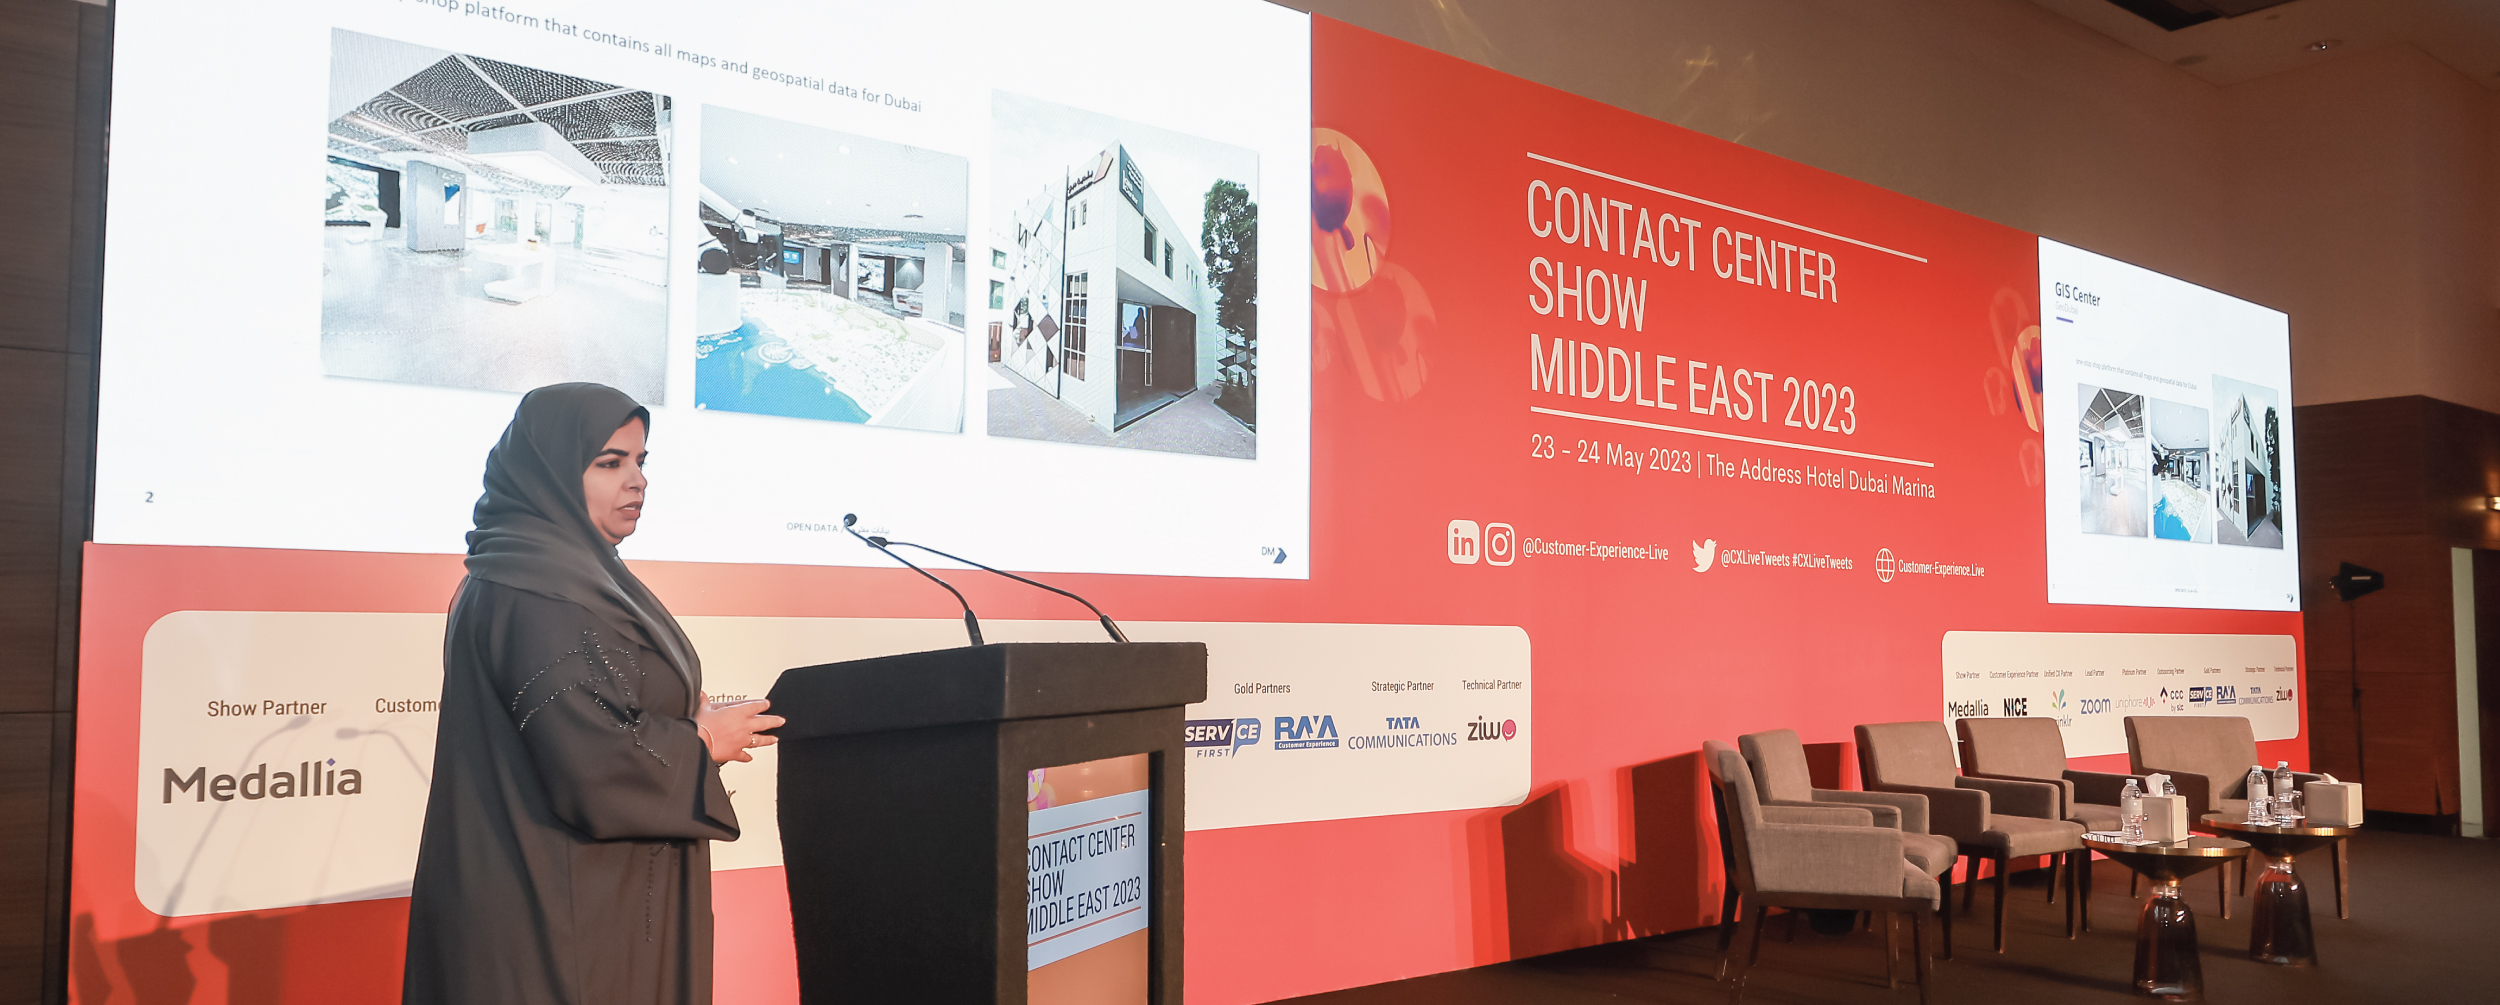 Contact Center Show Middle East 2023 Conference May 2023